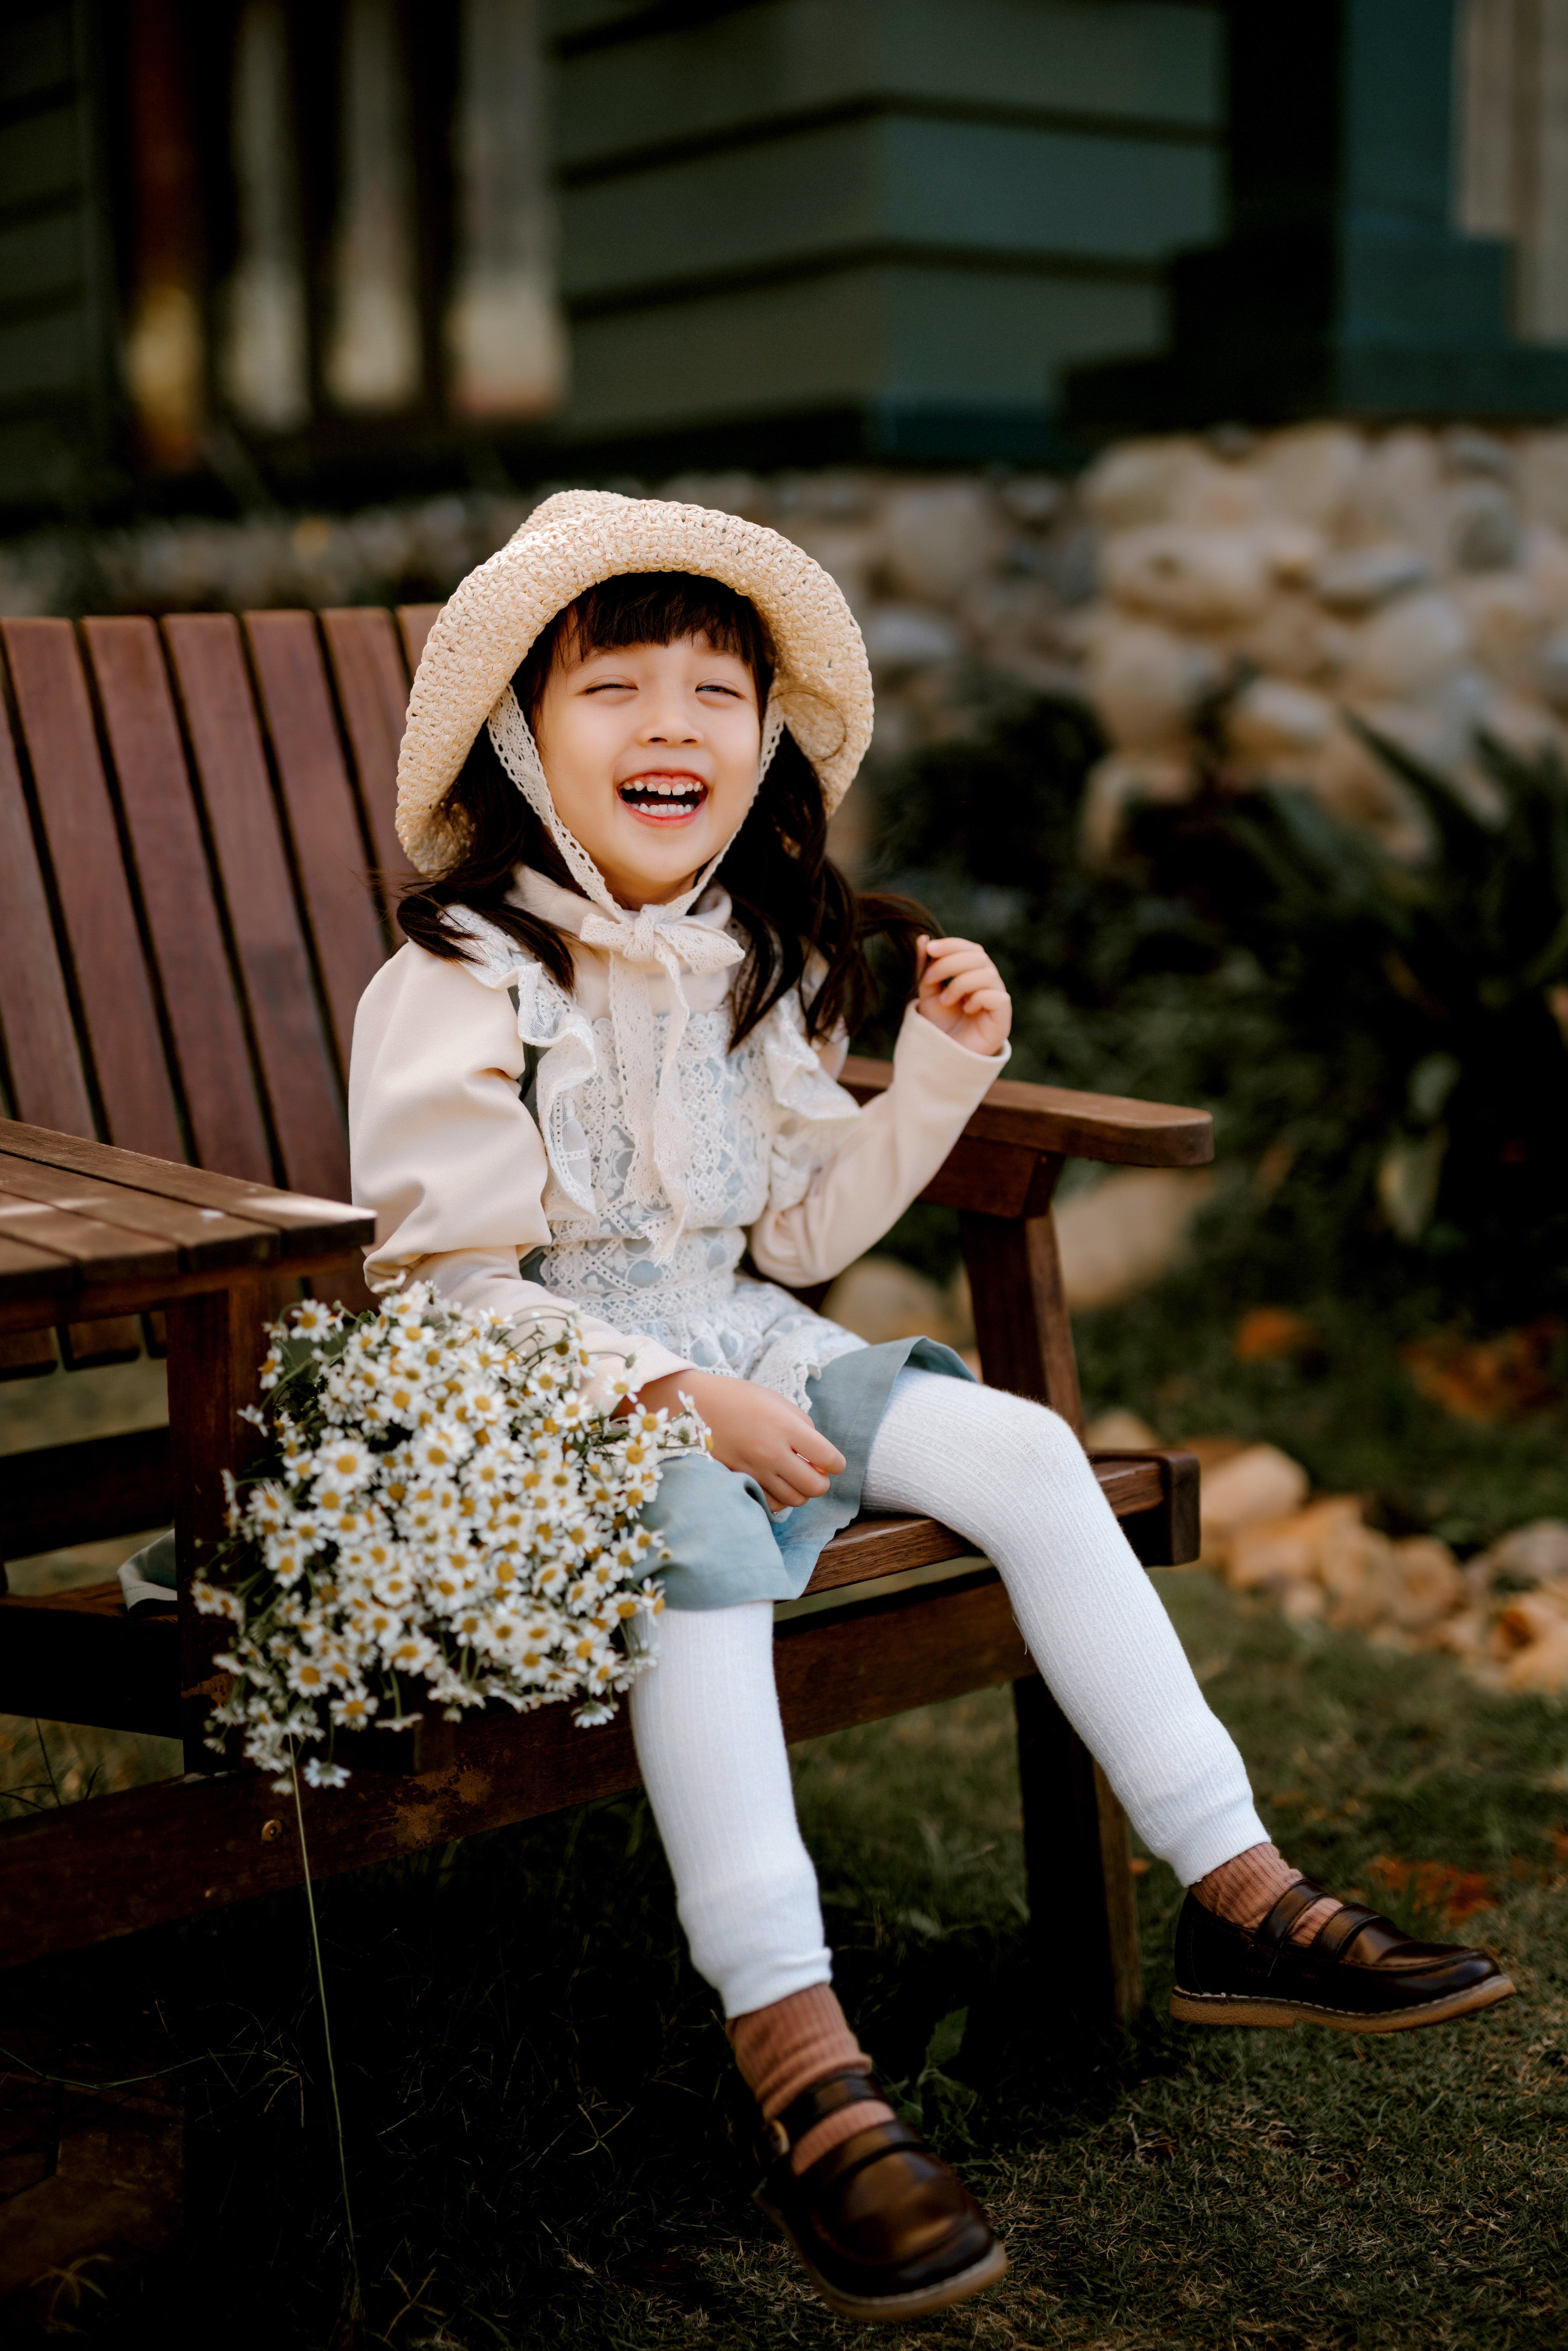 The little girl always sat at the same spot selling flowers. | Source: Pexels